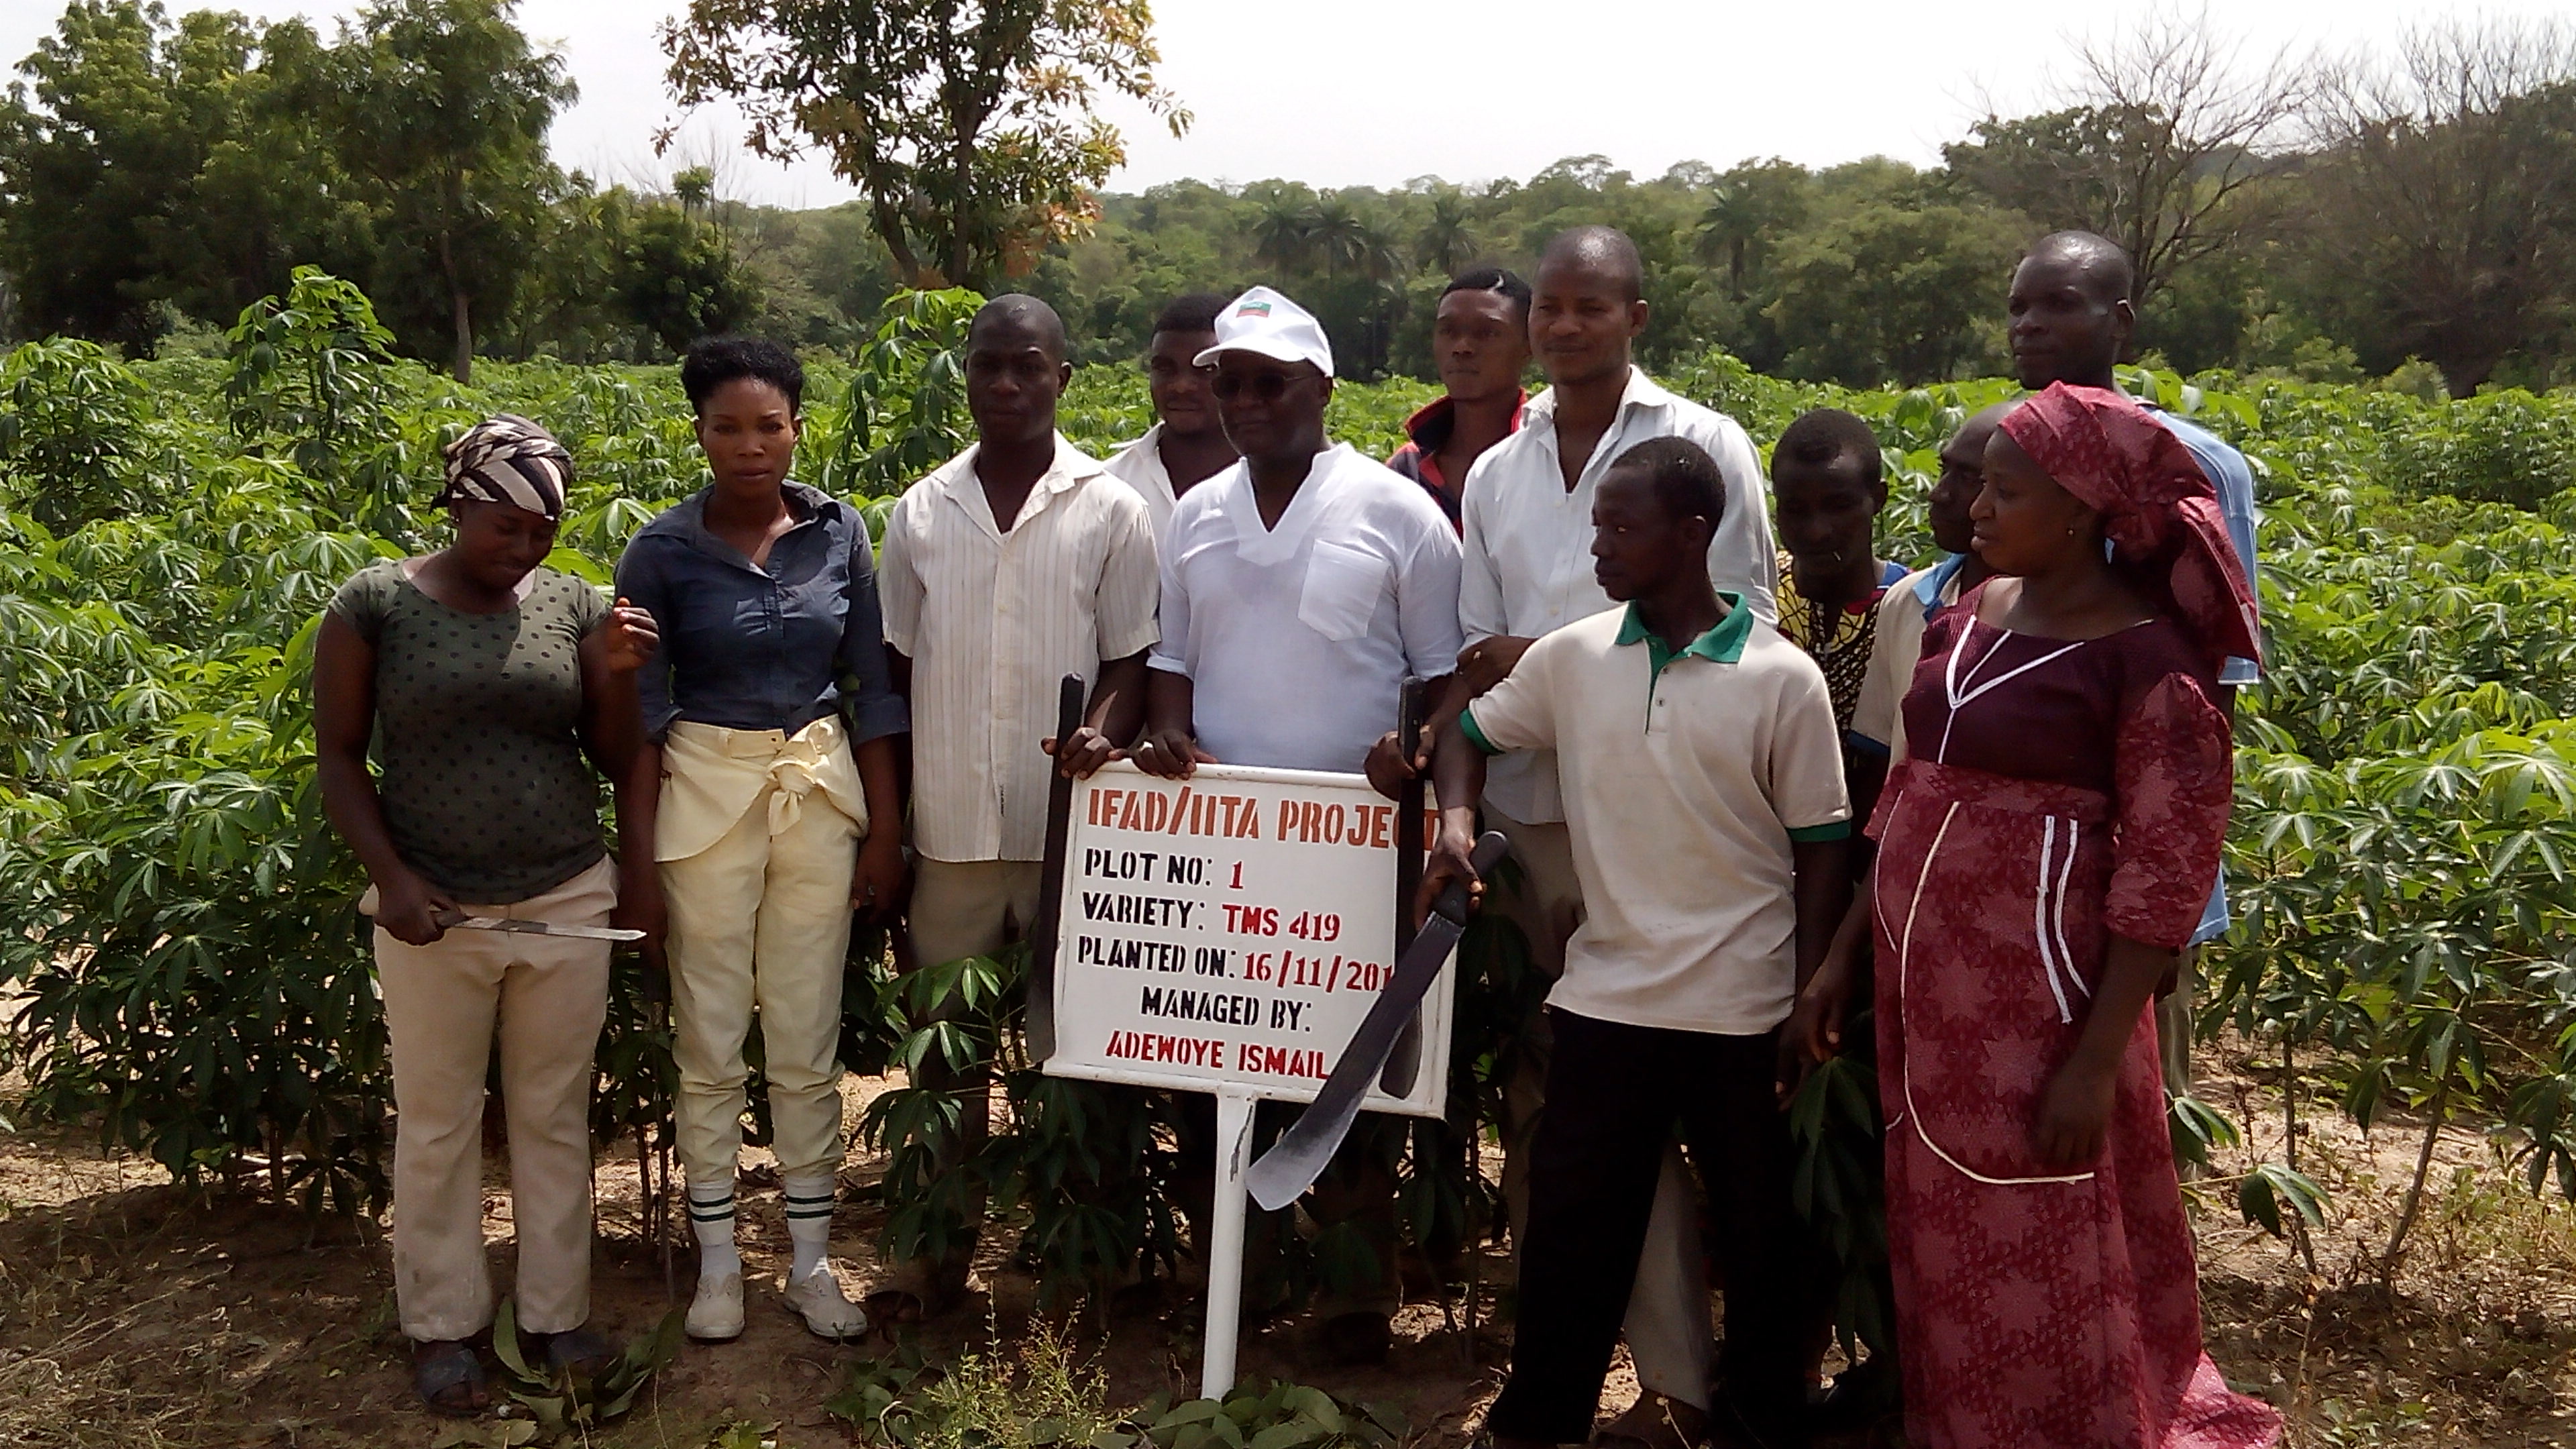 Dr Malu (wearing a white cap) with youth at WAHAN Farms, Ilorin.